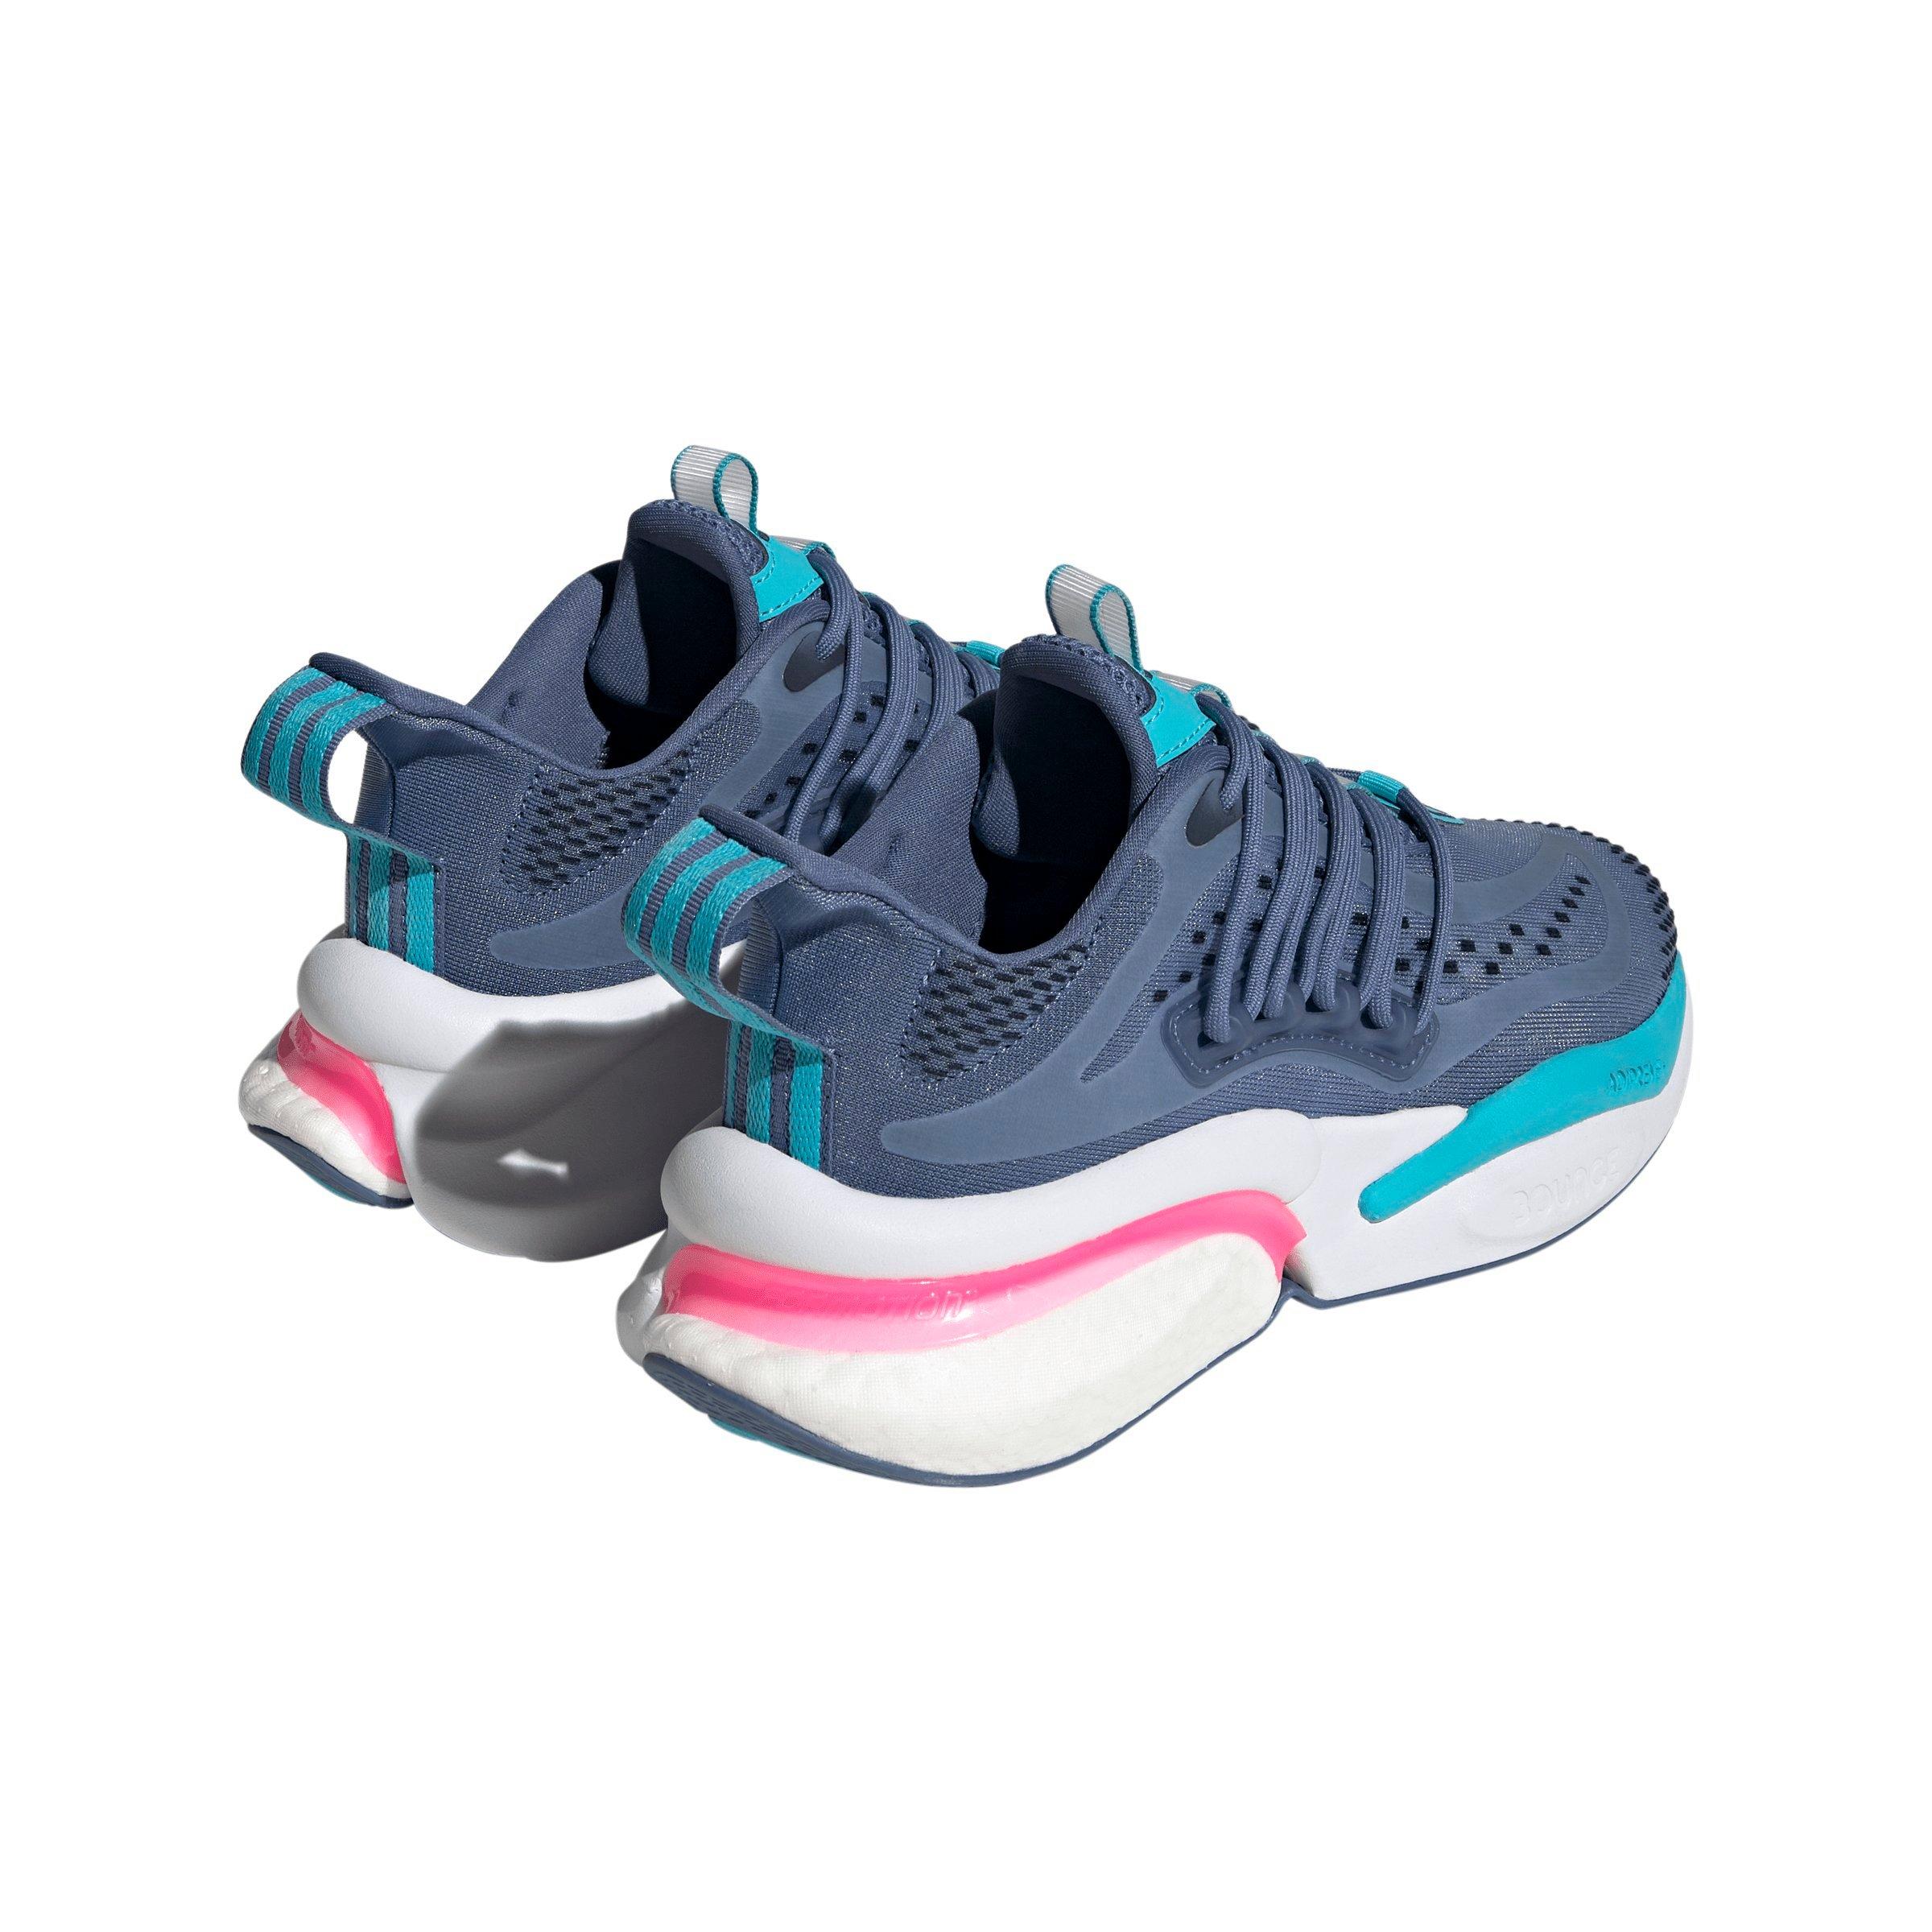 adidas Alphaboost V1 Shoes - Pink, Women's Lifestyle